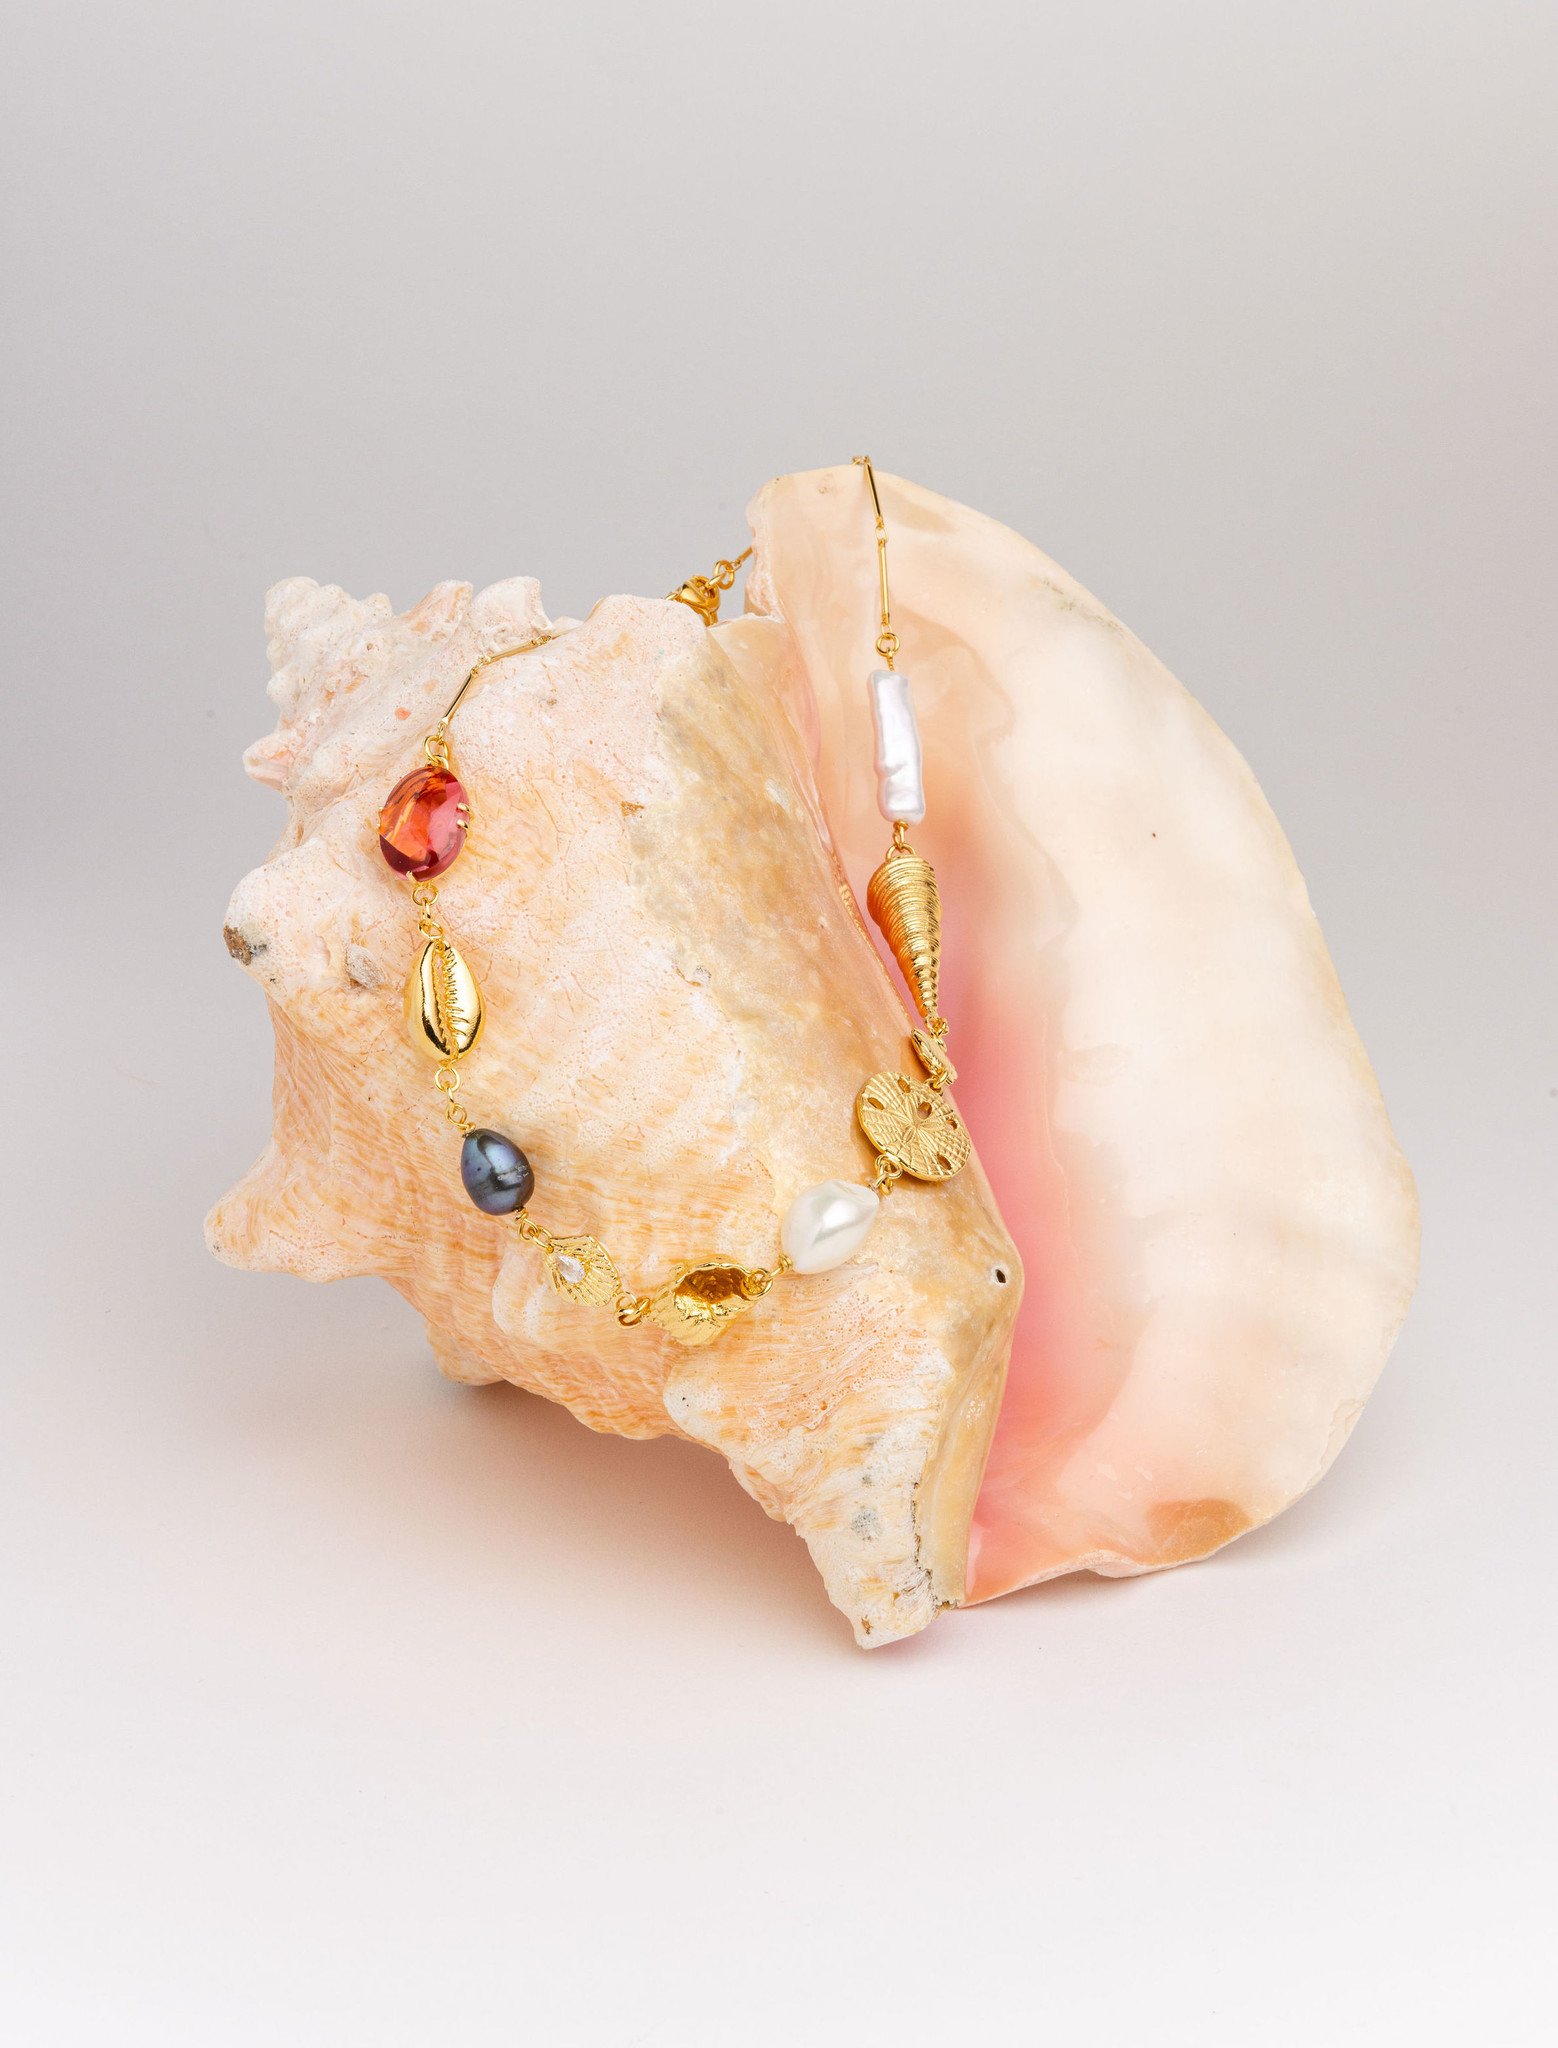 A delicate charm necklace with golden seashells, sand dollars, pearls, and glass stone jewels is draped over a brilliant conch shell with a soft pink interior and peachy-gold exterior. 